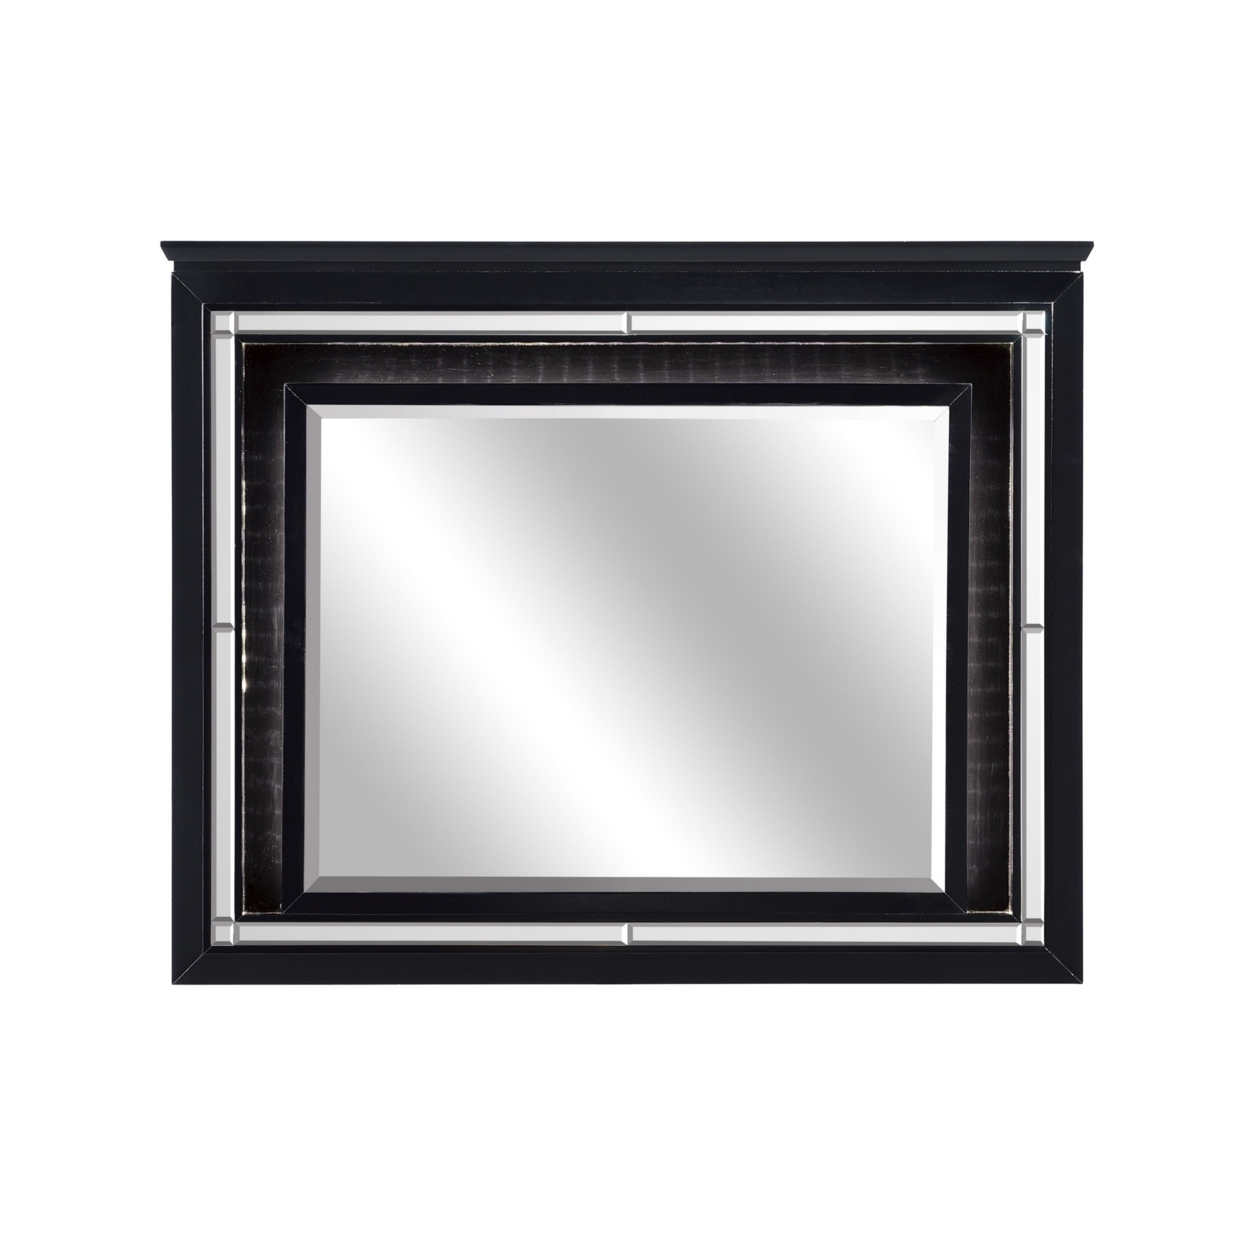 Contemporary Style Beveled Edge Mirror With LED Light, Black And Silver- Saltoro Sherpi